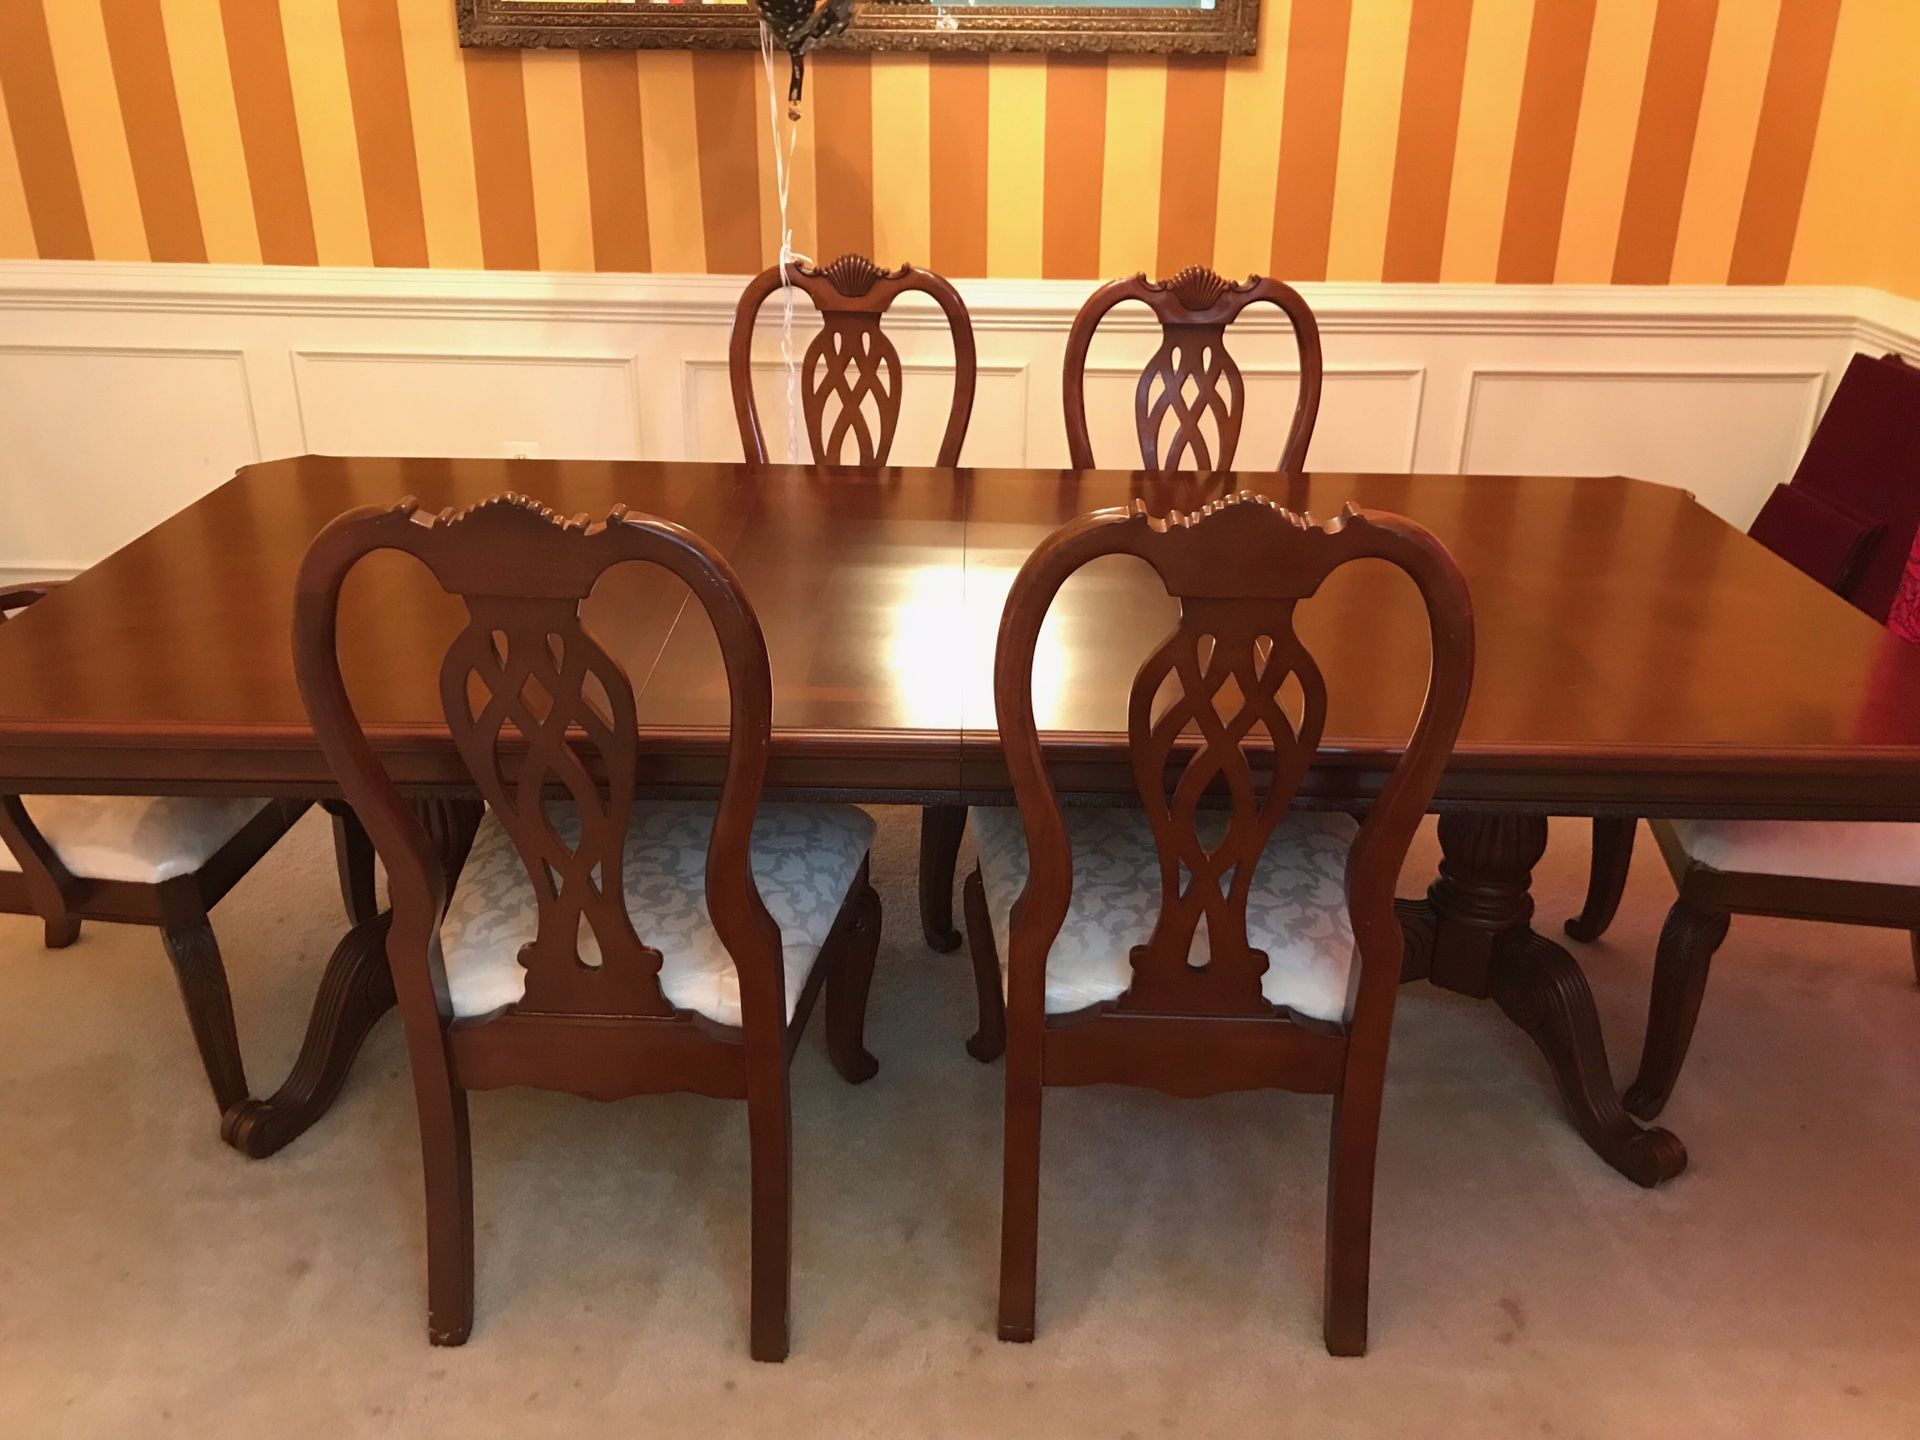 Real wood- mahogany wood- heavy dining table set for 6 chairs included. Extendable table to seat 8